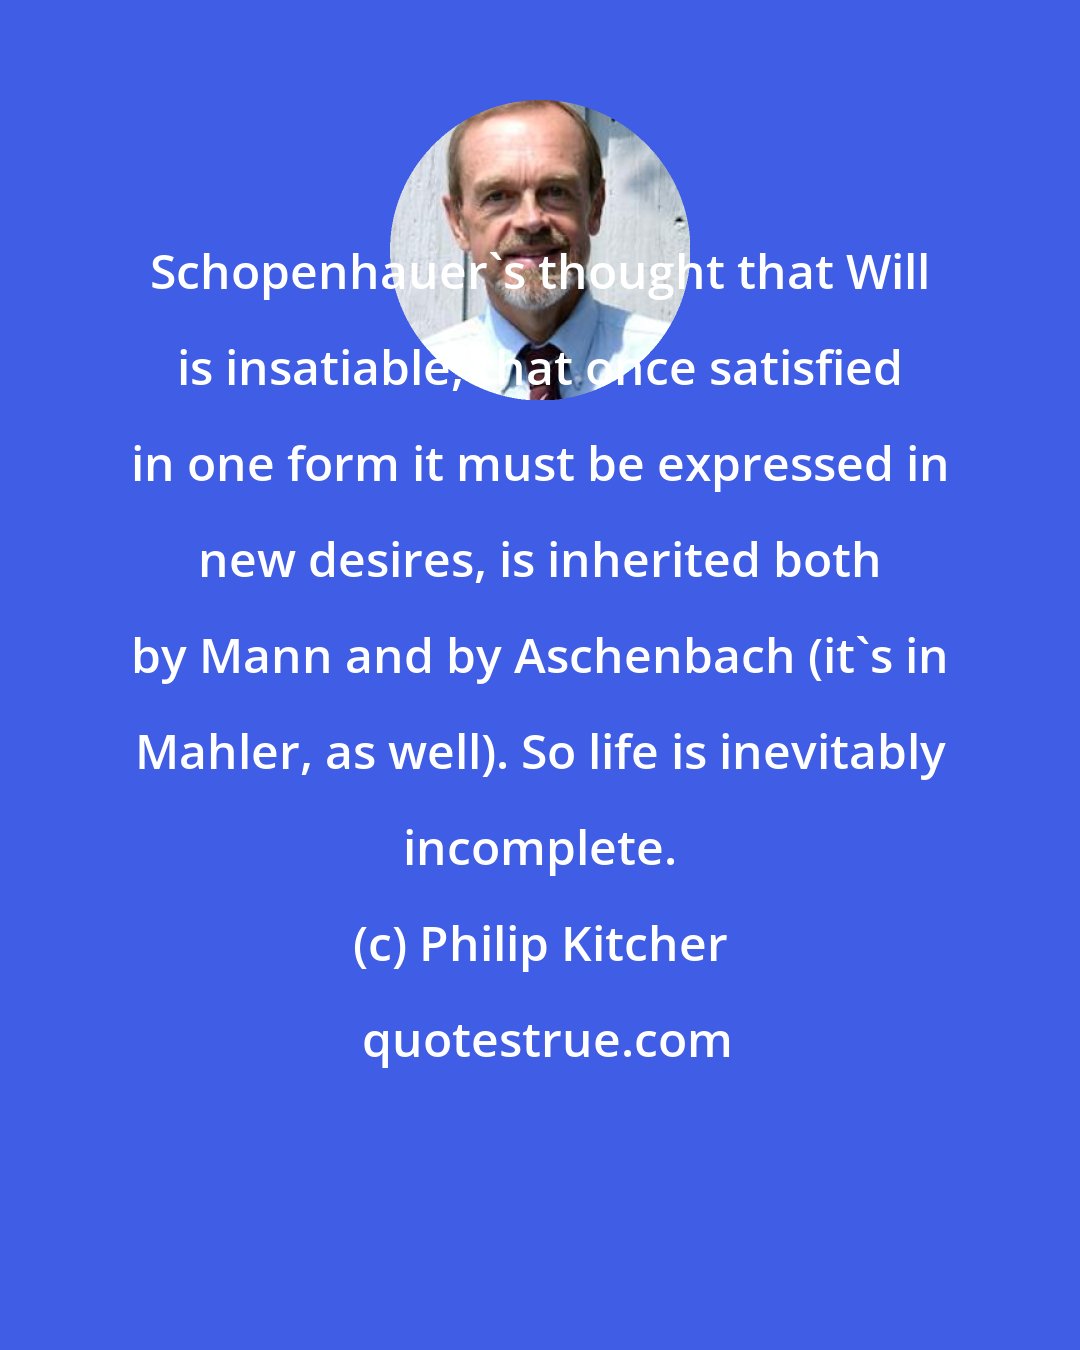 Philip Kitcher: Schopenhauer's thought that Will is insatiable, that once satisfied in one form it must be expressed in new desires, is inherited both by Mann and by Aschenbach (it's in Mahler, as well). So life is inevitably incomplete.